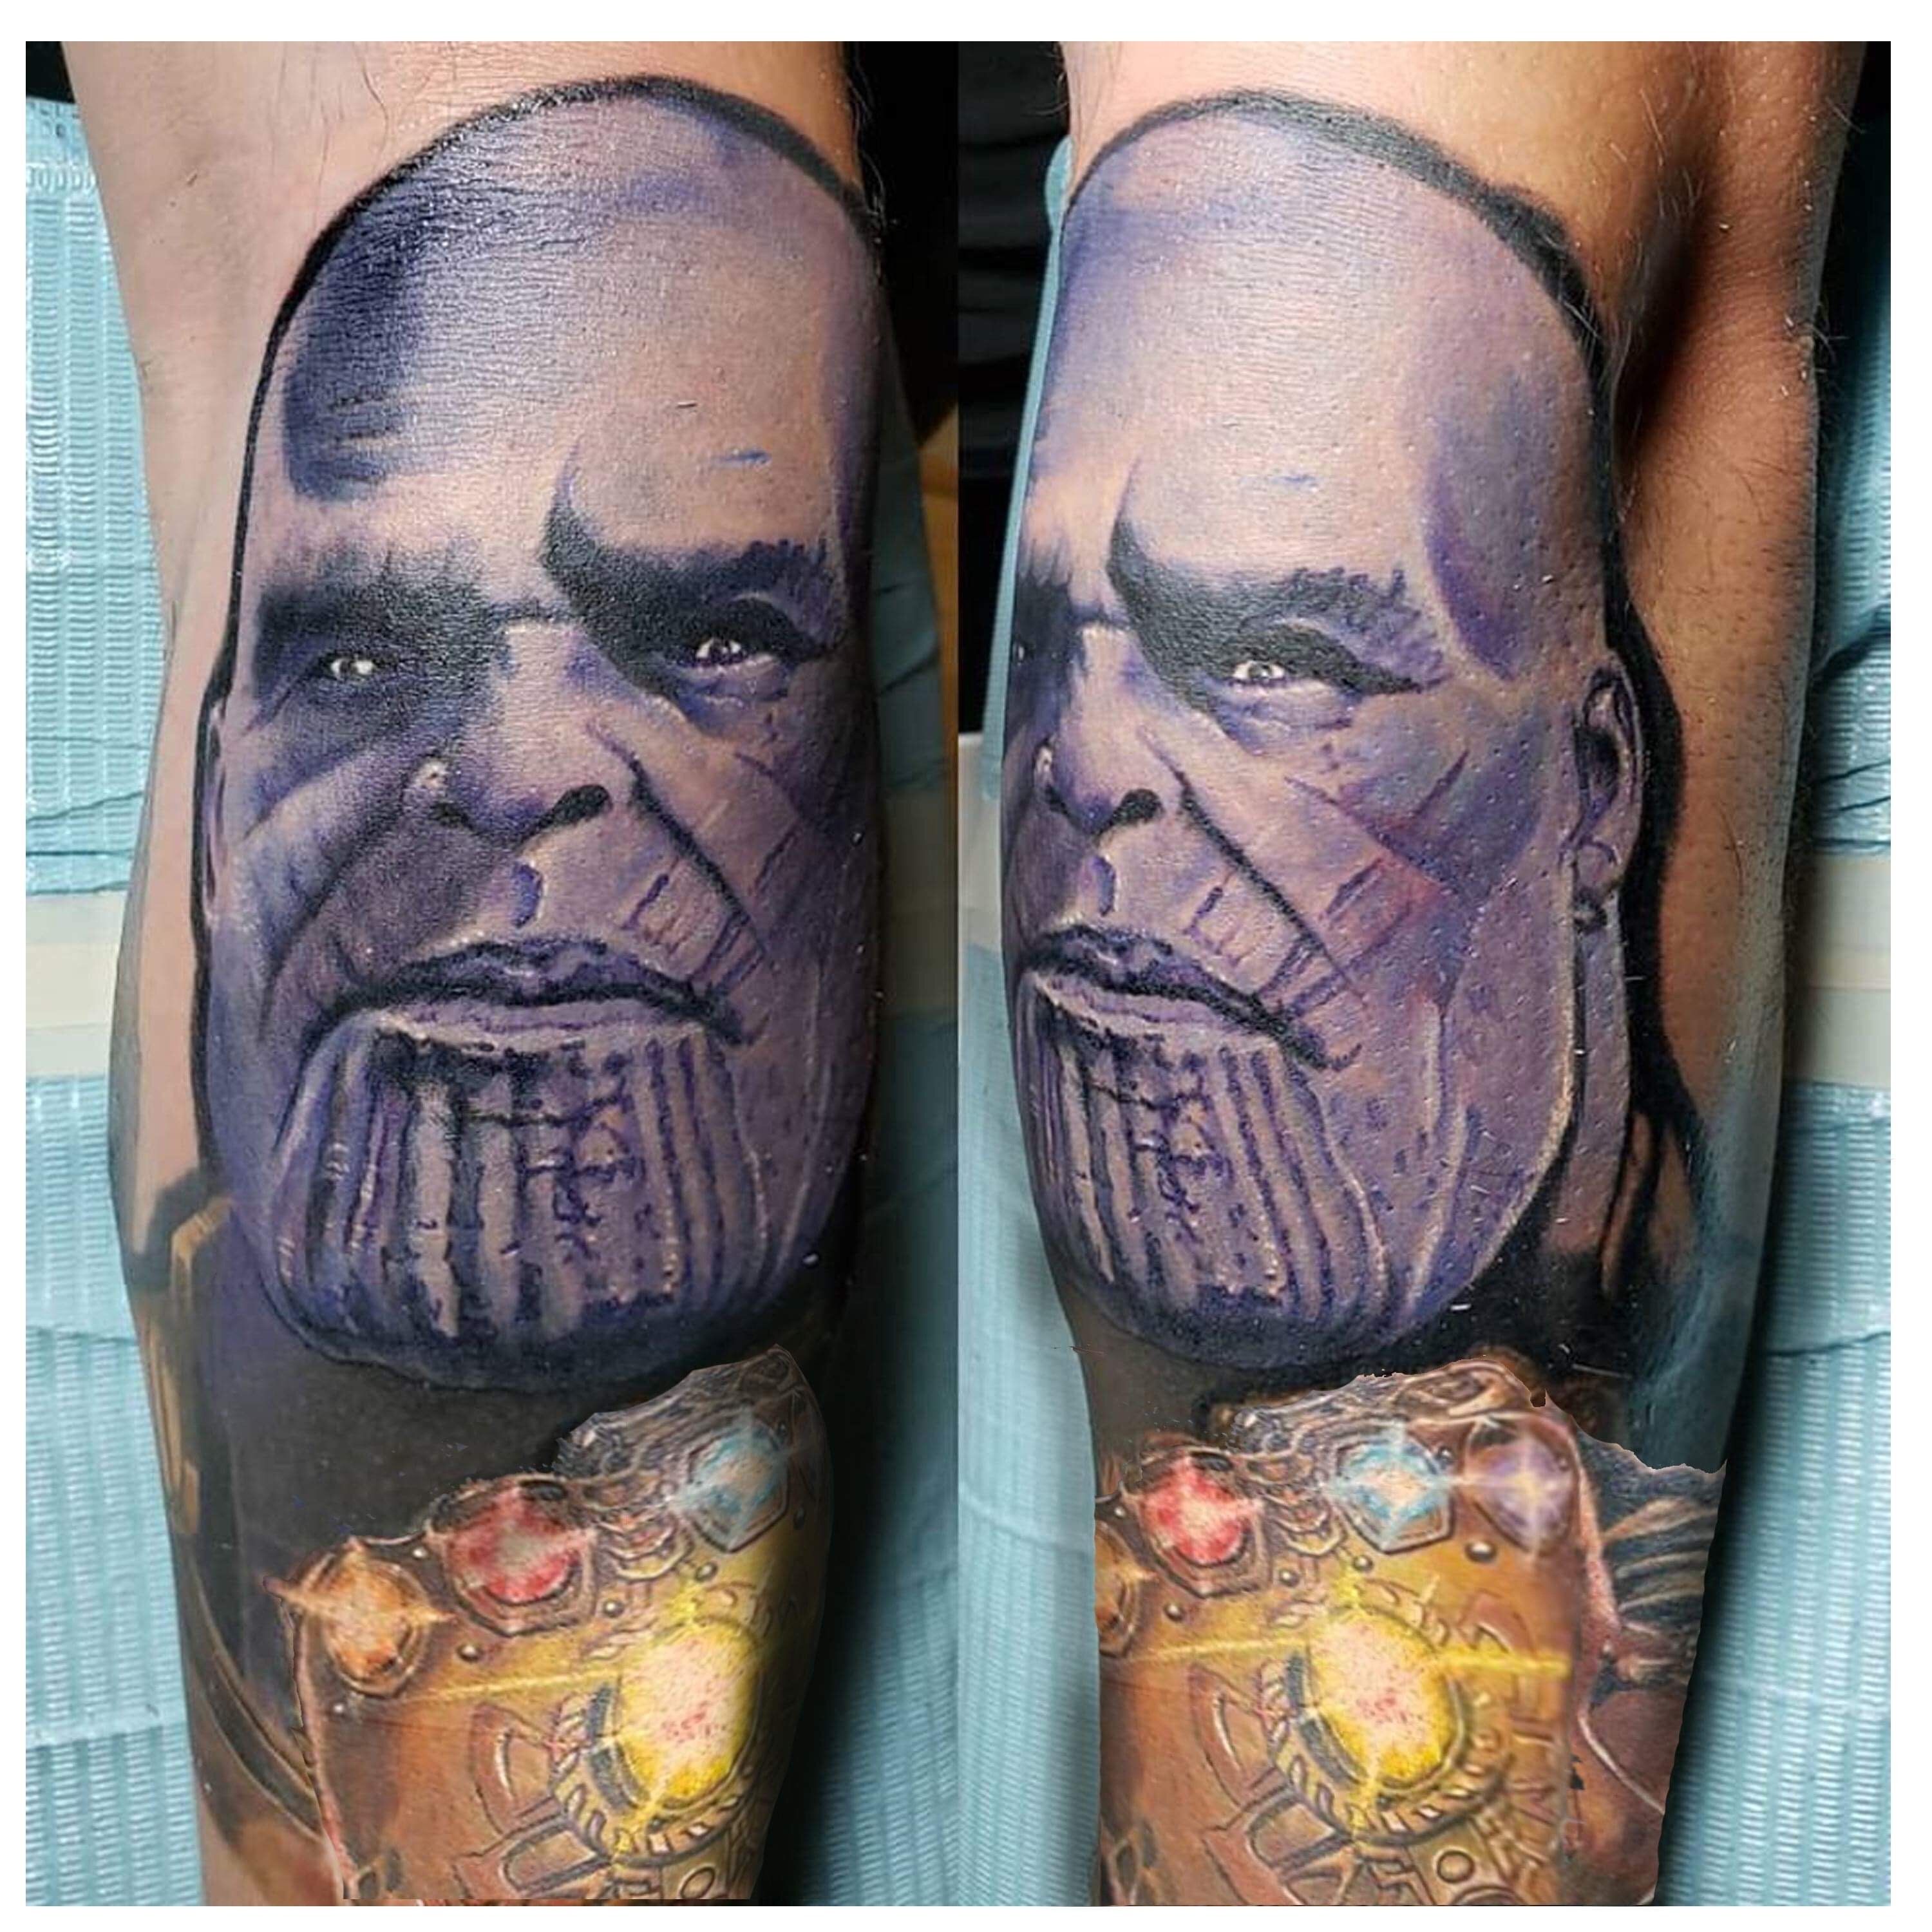 Amazing Infinity gauntlet tattoo Done by Jaki at Revelation Tattoo in  Orange Park FL Pic Stolen from the forbidden place   rthanosdidnothingwrong